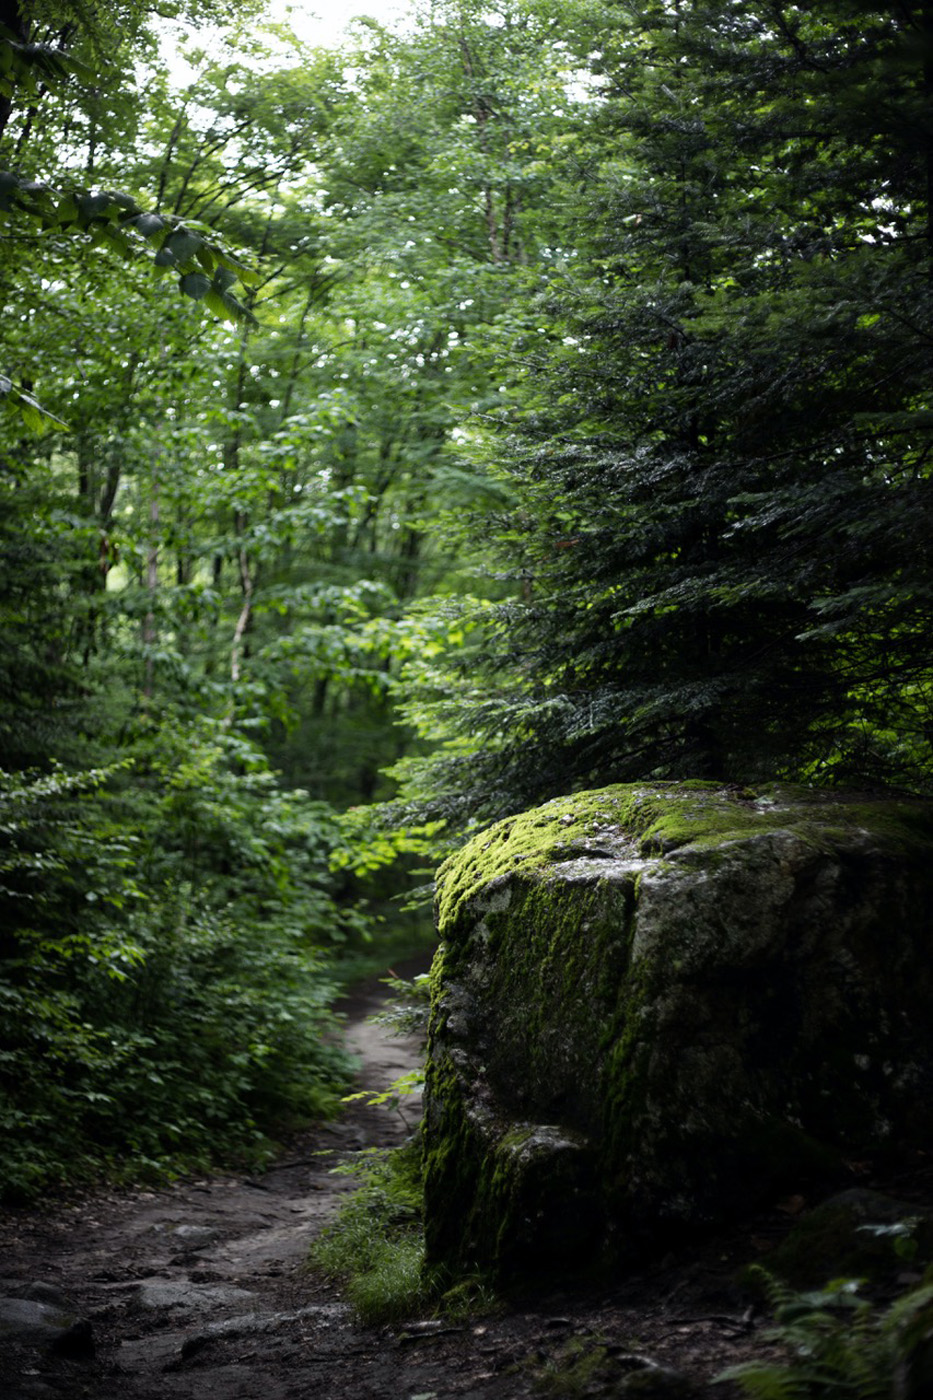 stone path through nature forest